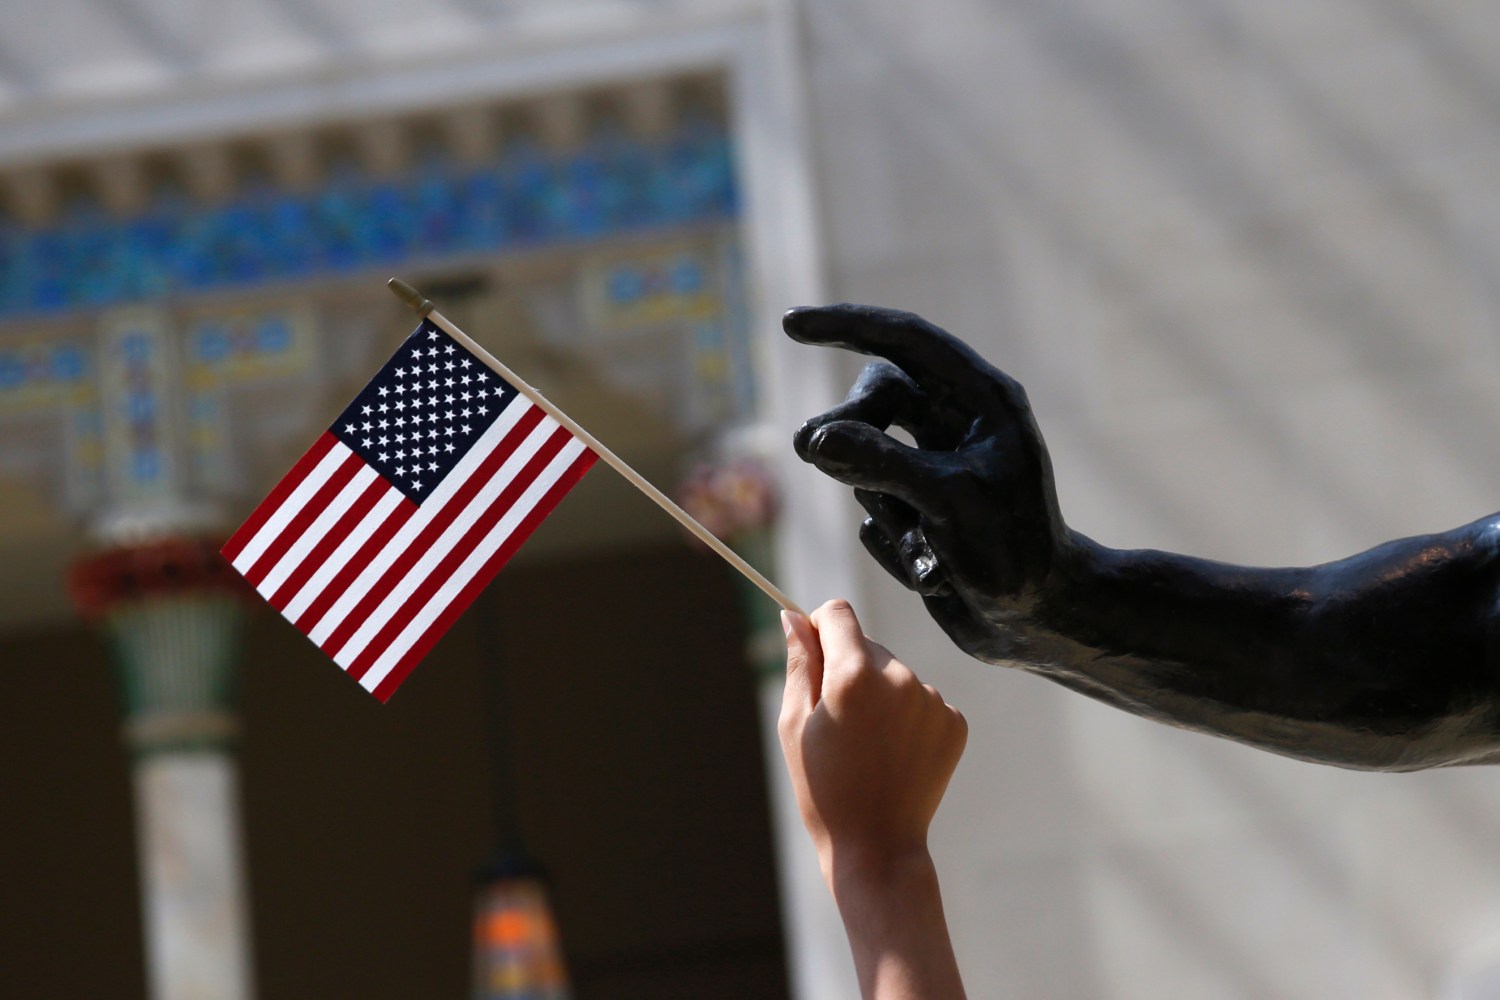 A girl holds a U.S. flag next to a sculpture after a naturalization ceremony at The Metropolitan Museum of Art in New York July 22, 2014. Seventy-five people from 42 countries became American citizens at an event held by U.S. Citizenship and Immigration Services (USCIS) at the Museum.